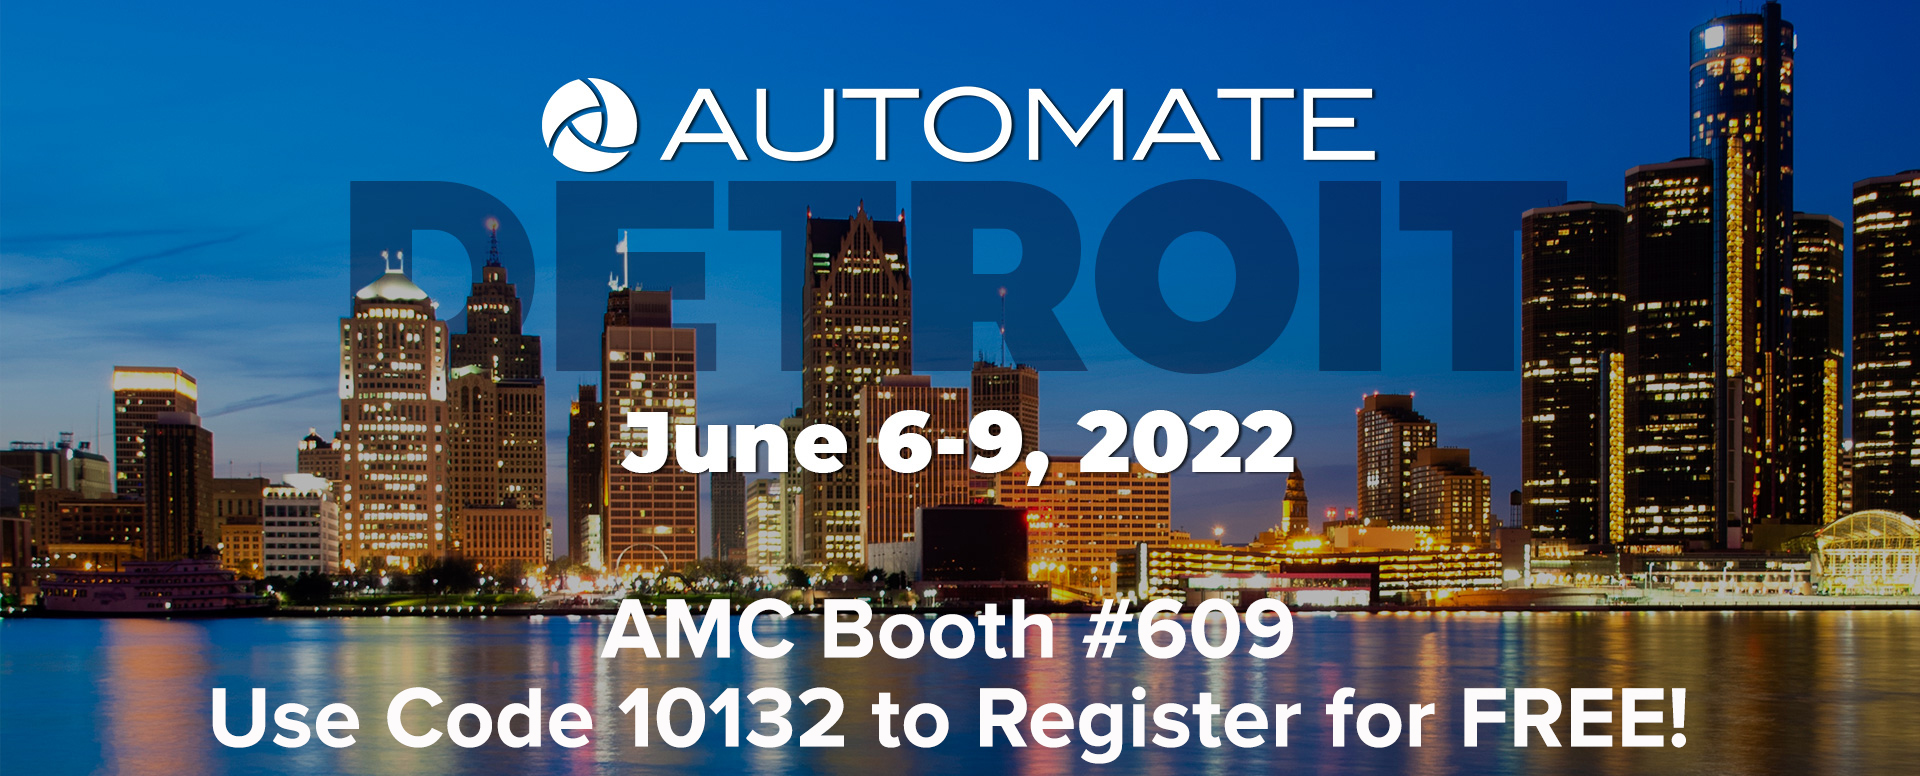 Automate Detroit. June 6-9, 2022. AMC Booth #609. Use code 10132 to register for free!